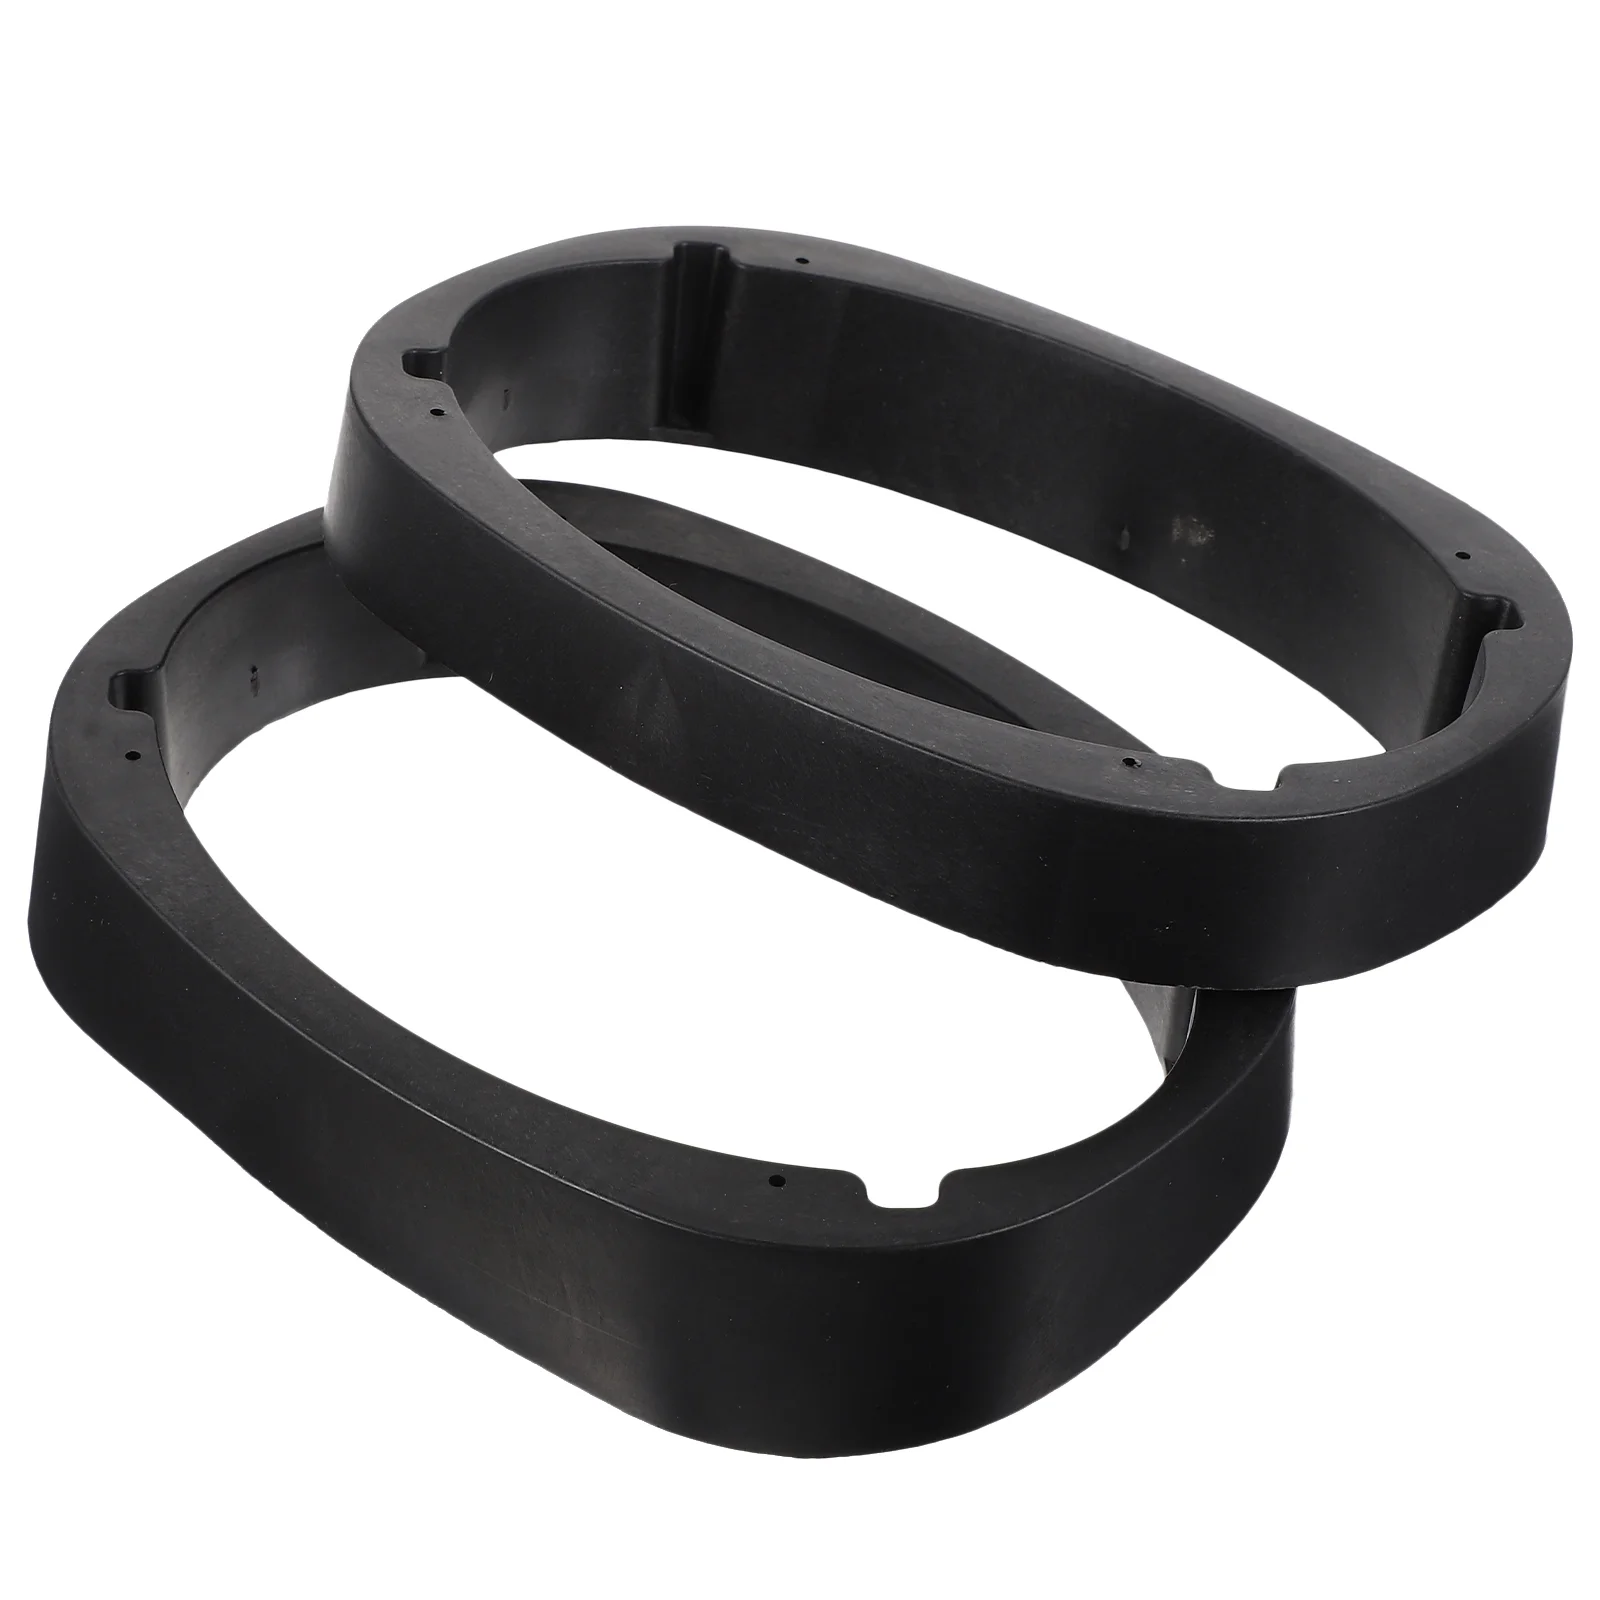 

2 Pcs Plastic Shims Speaker Adapter Rings Speaker Replacement Washers Mounting Spacer Adaptor Ring Durable Washer Rings